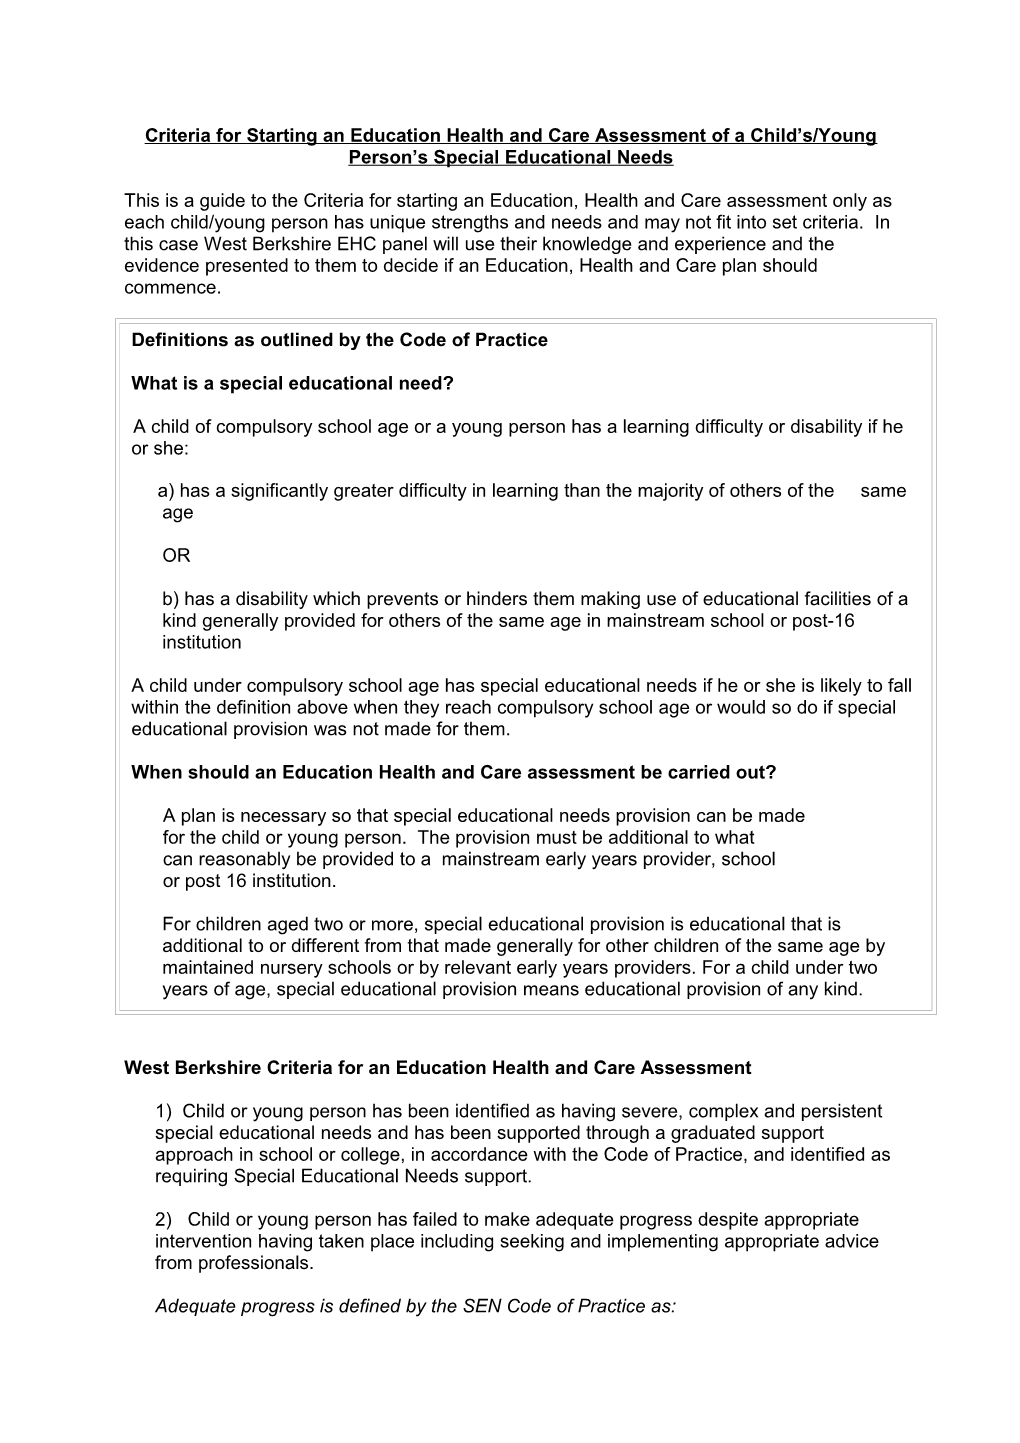 Criteria for Starting an Education Health and Care Assessment of a Child/Young Persons